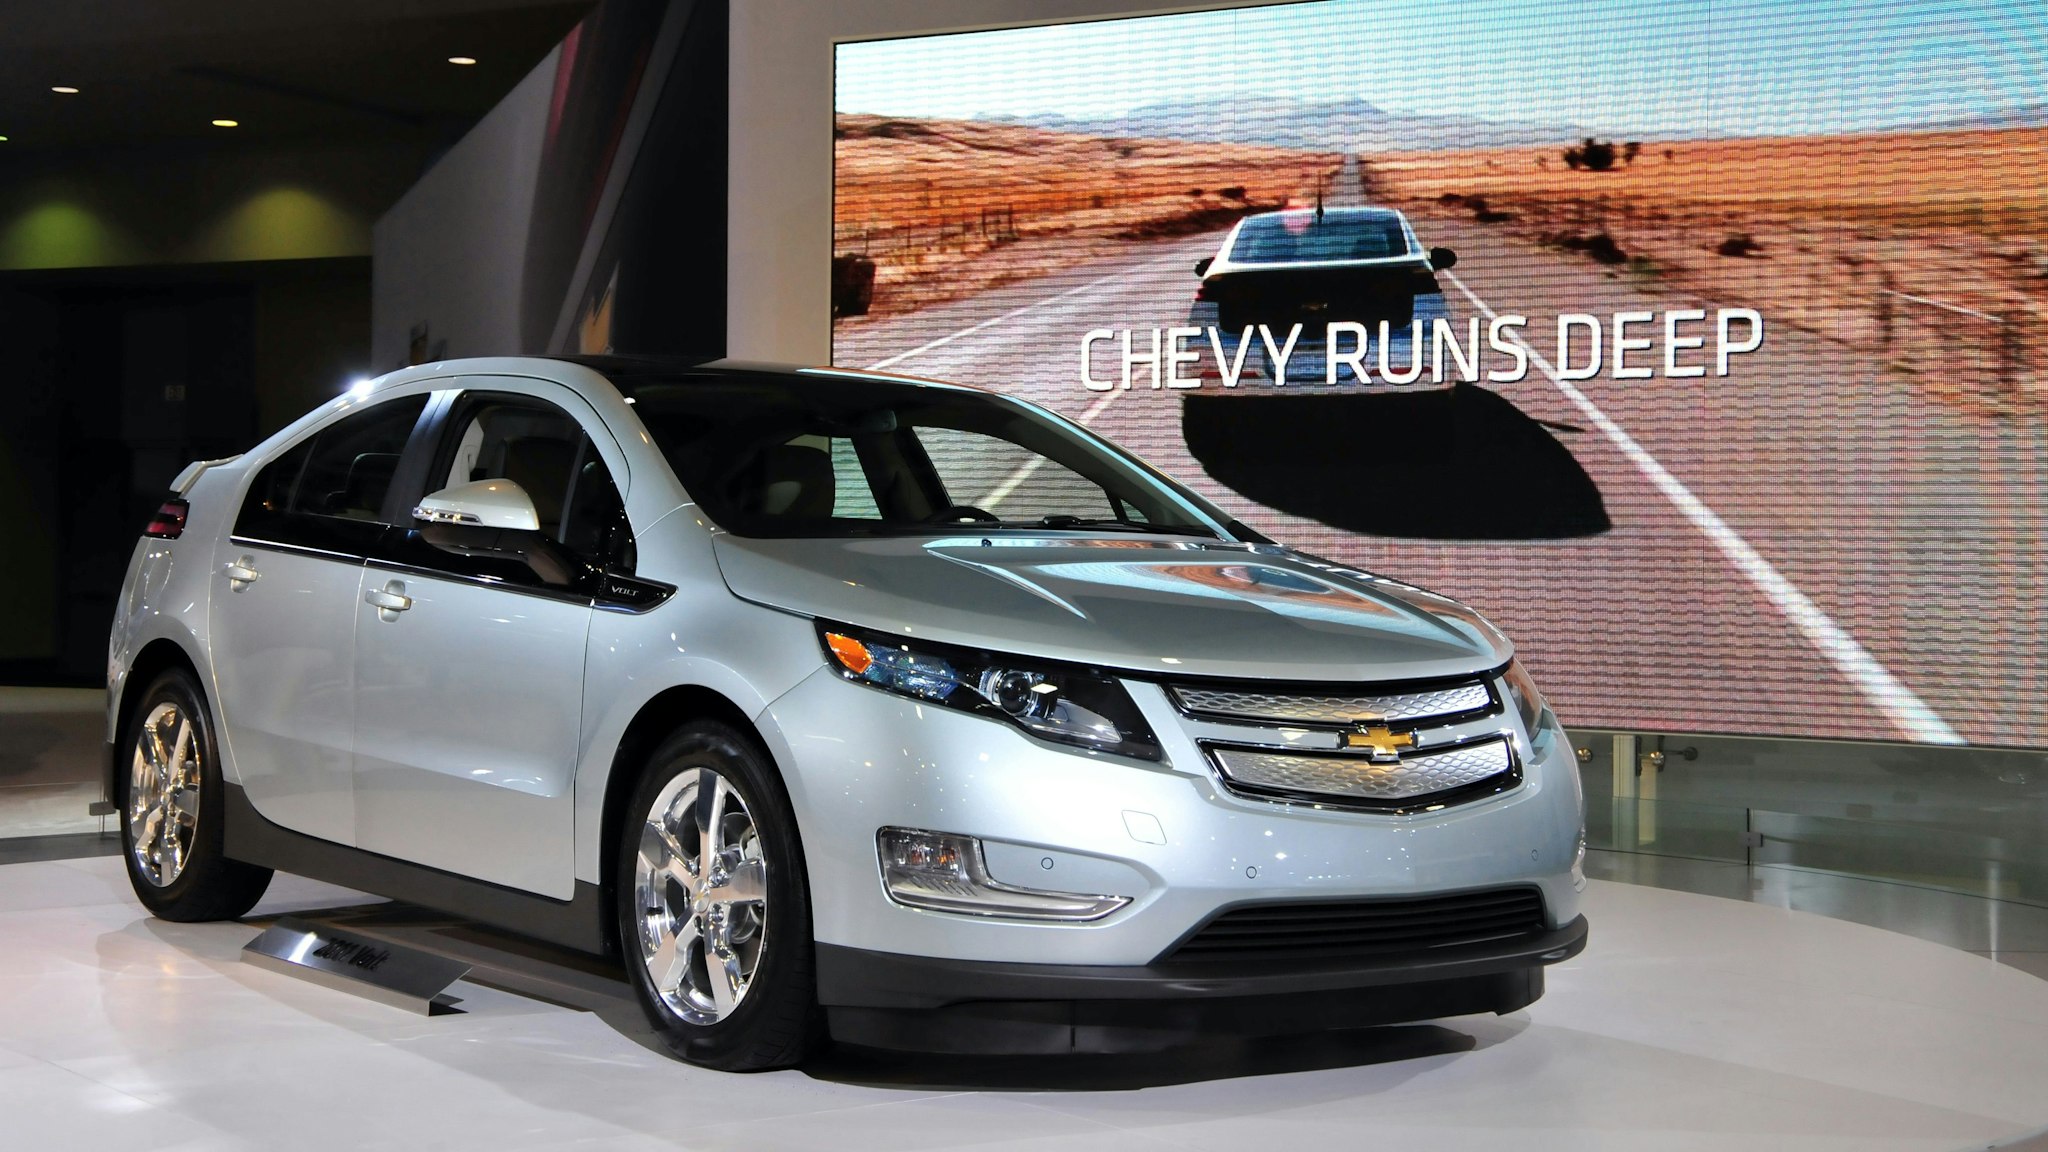 The 2011 Chevrolet Volt on display at the 2011 Washington Auto Show January 27, 2011 at the Washington Convention Center in Washington, DC. The shows runs January 28 - February 6